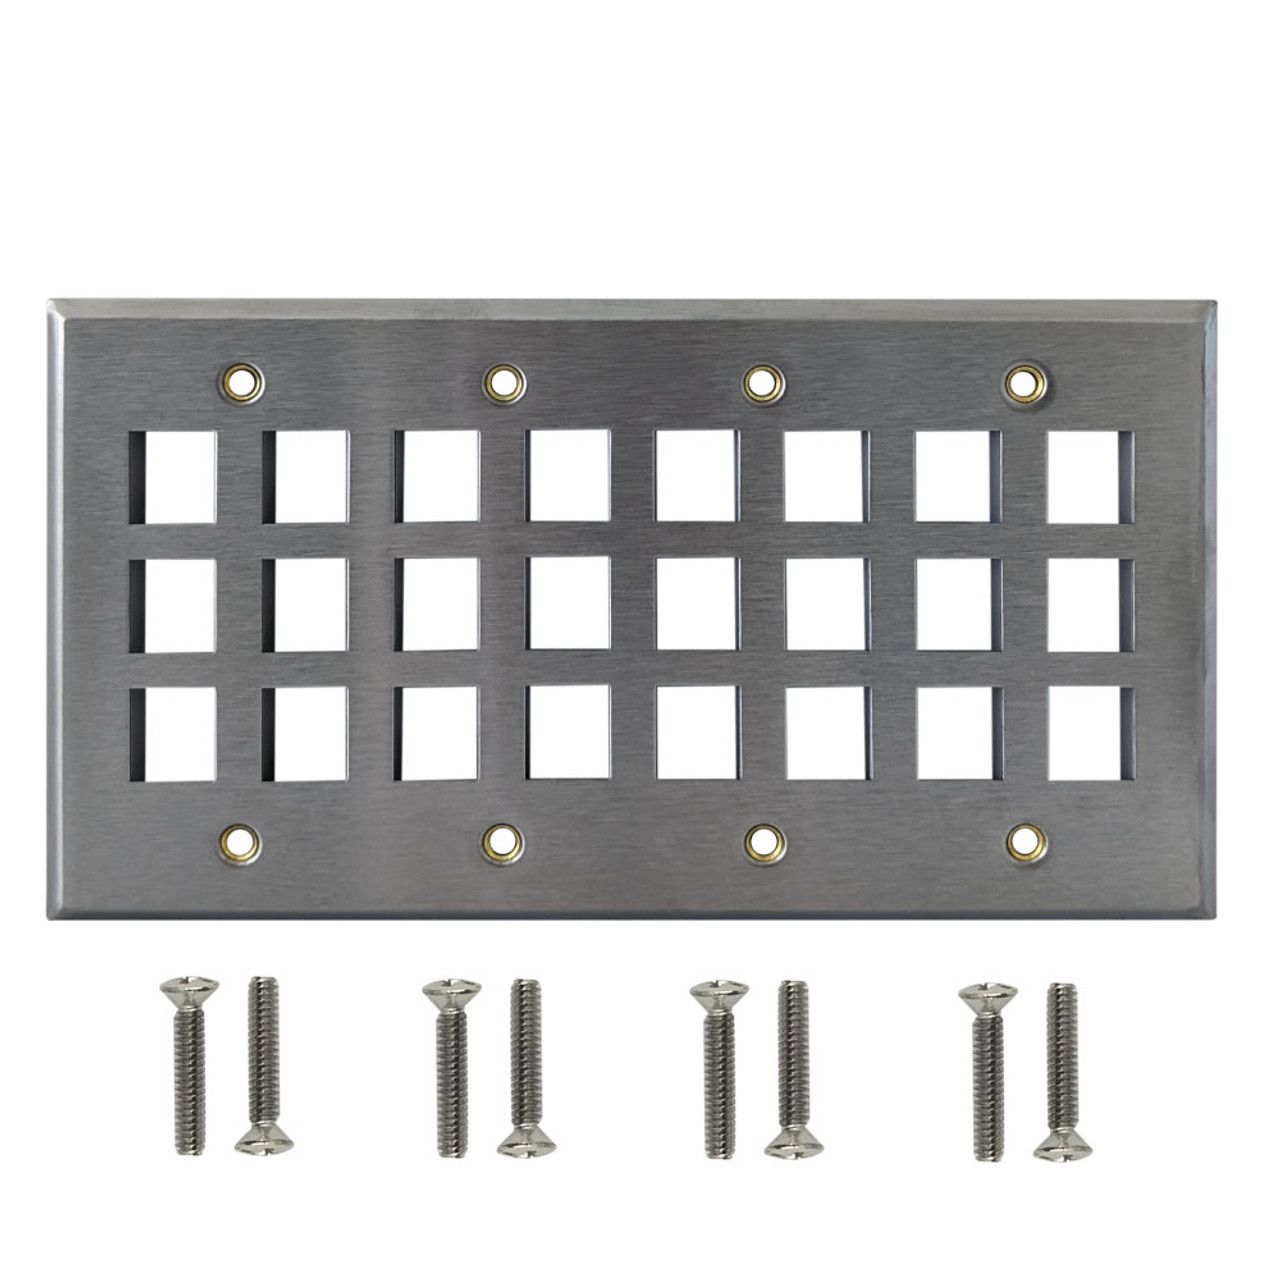 Four Gang 24 Port Keystone Stainless Steel Wall Plate